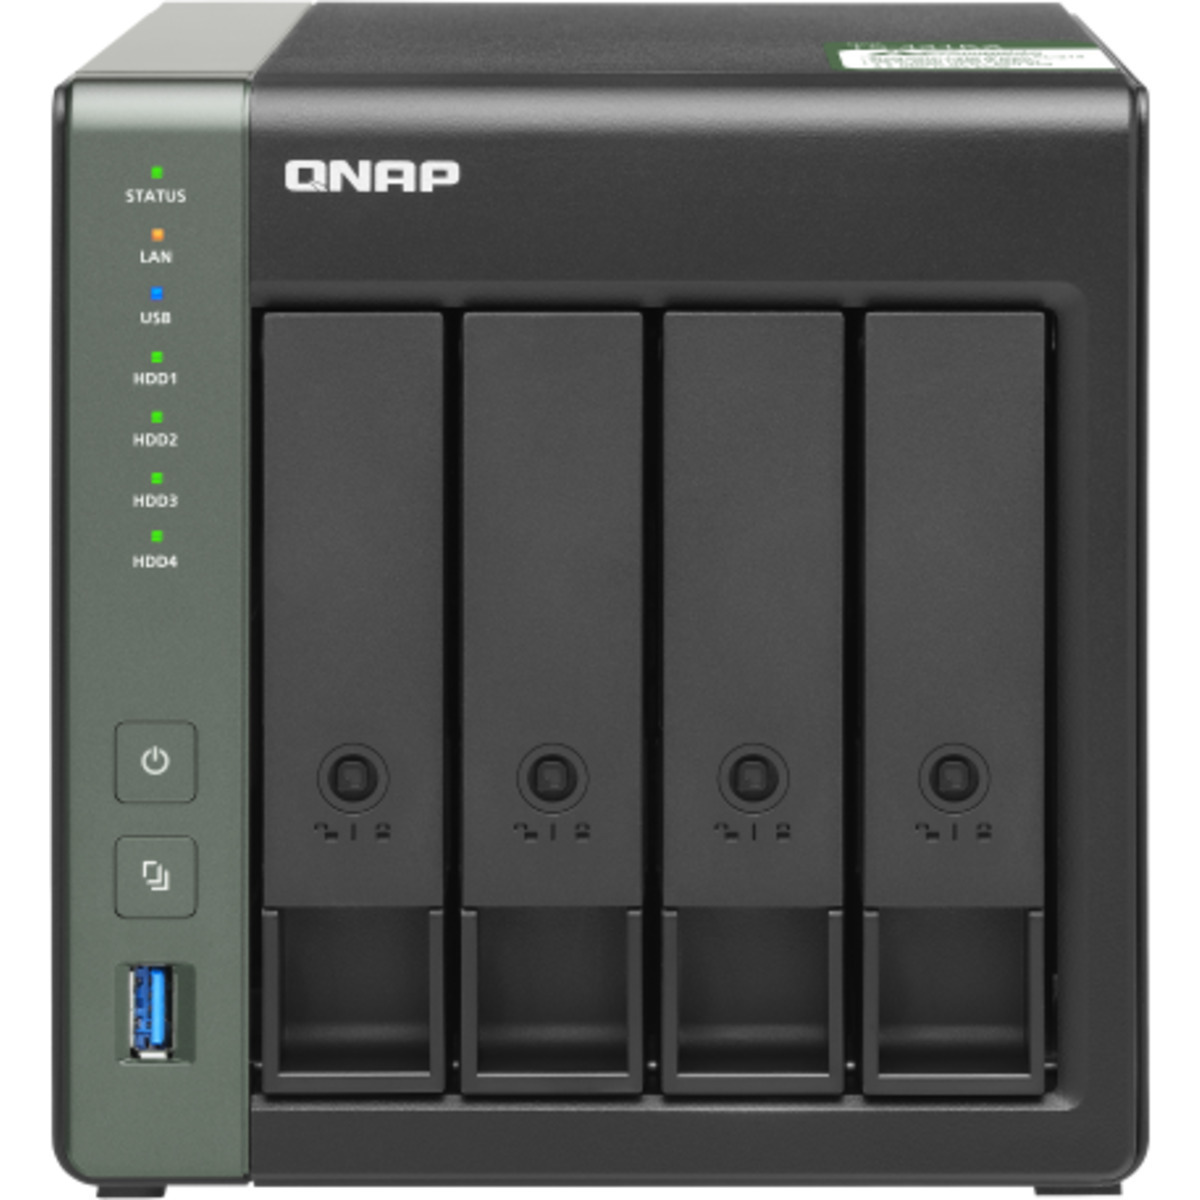 buy $1606 QNAP TS-431KX 32tb Desktop NAS - Network Attached Storage Device 4x8000gb Seagate EXOS ST8000NM000A 3.5 7200rpm SATA 6Gb/s HDD ENTERPRISE Class Drives Installed - Burn-In Tested - FREE RAM UPGRADE - nas headquarters buy network attached storage server device das new raid-5 free shipping usa christmas new year holiday sale TS-431KX